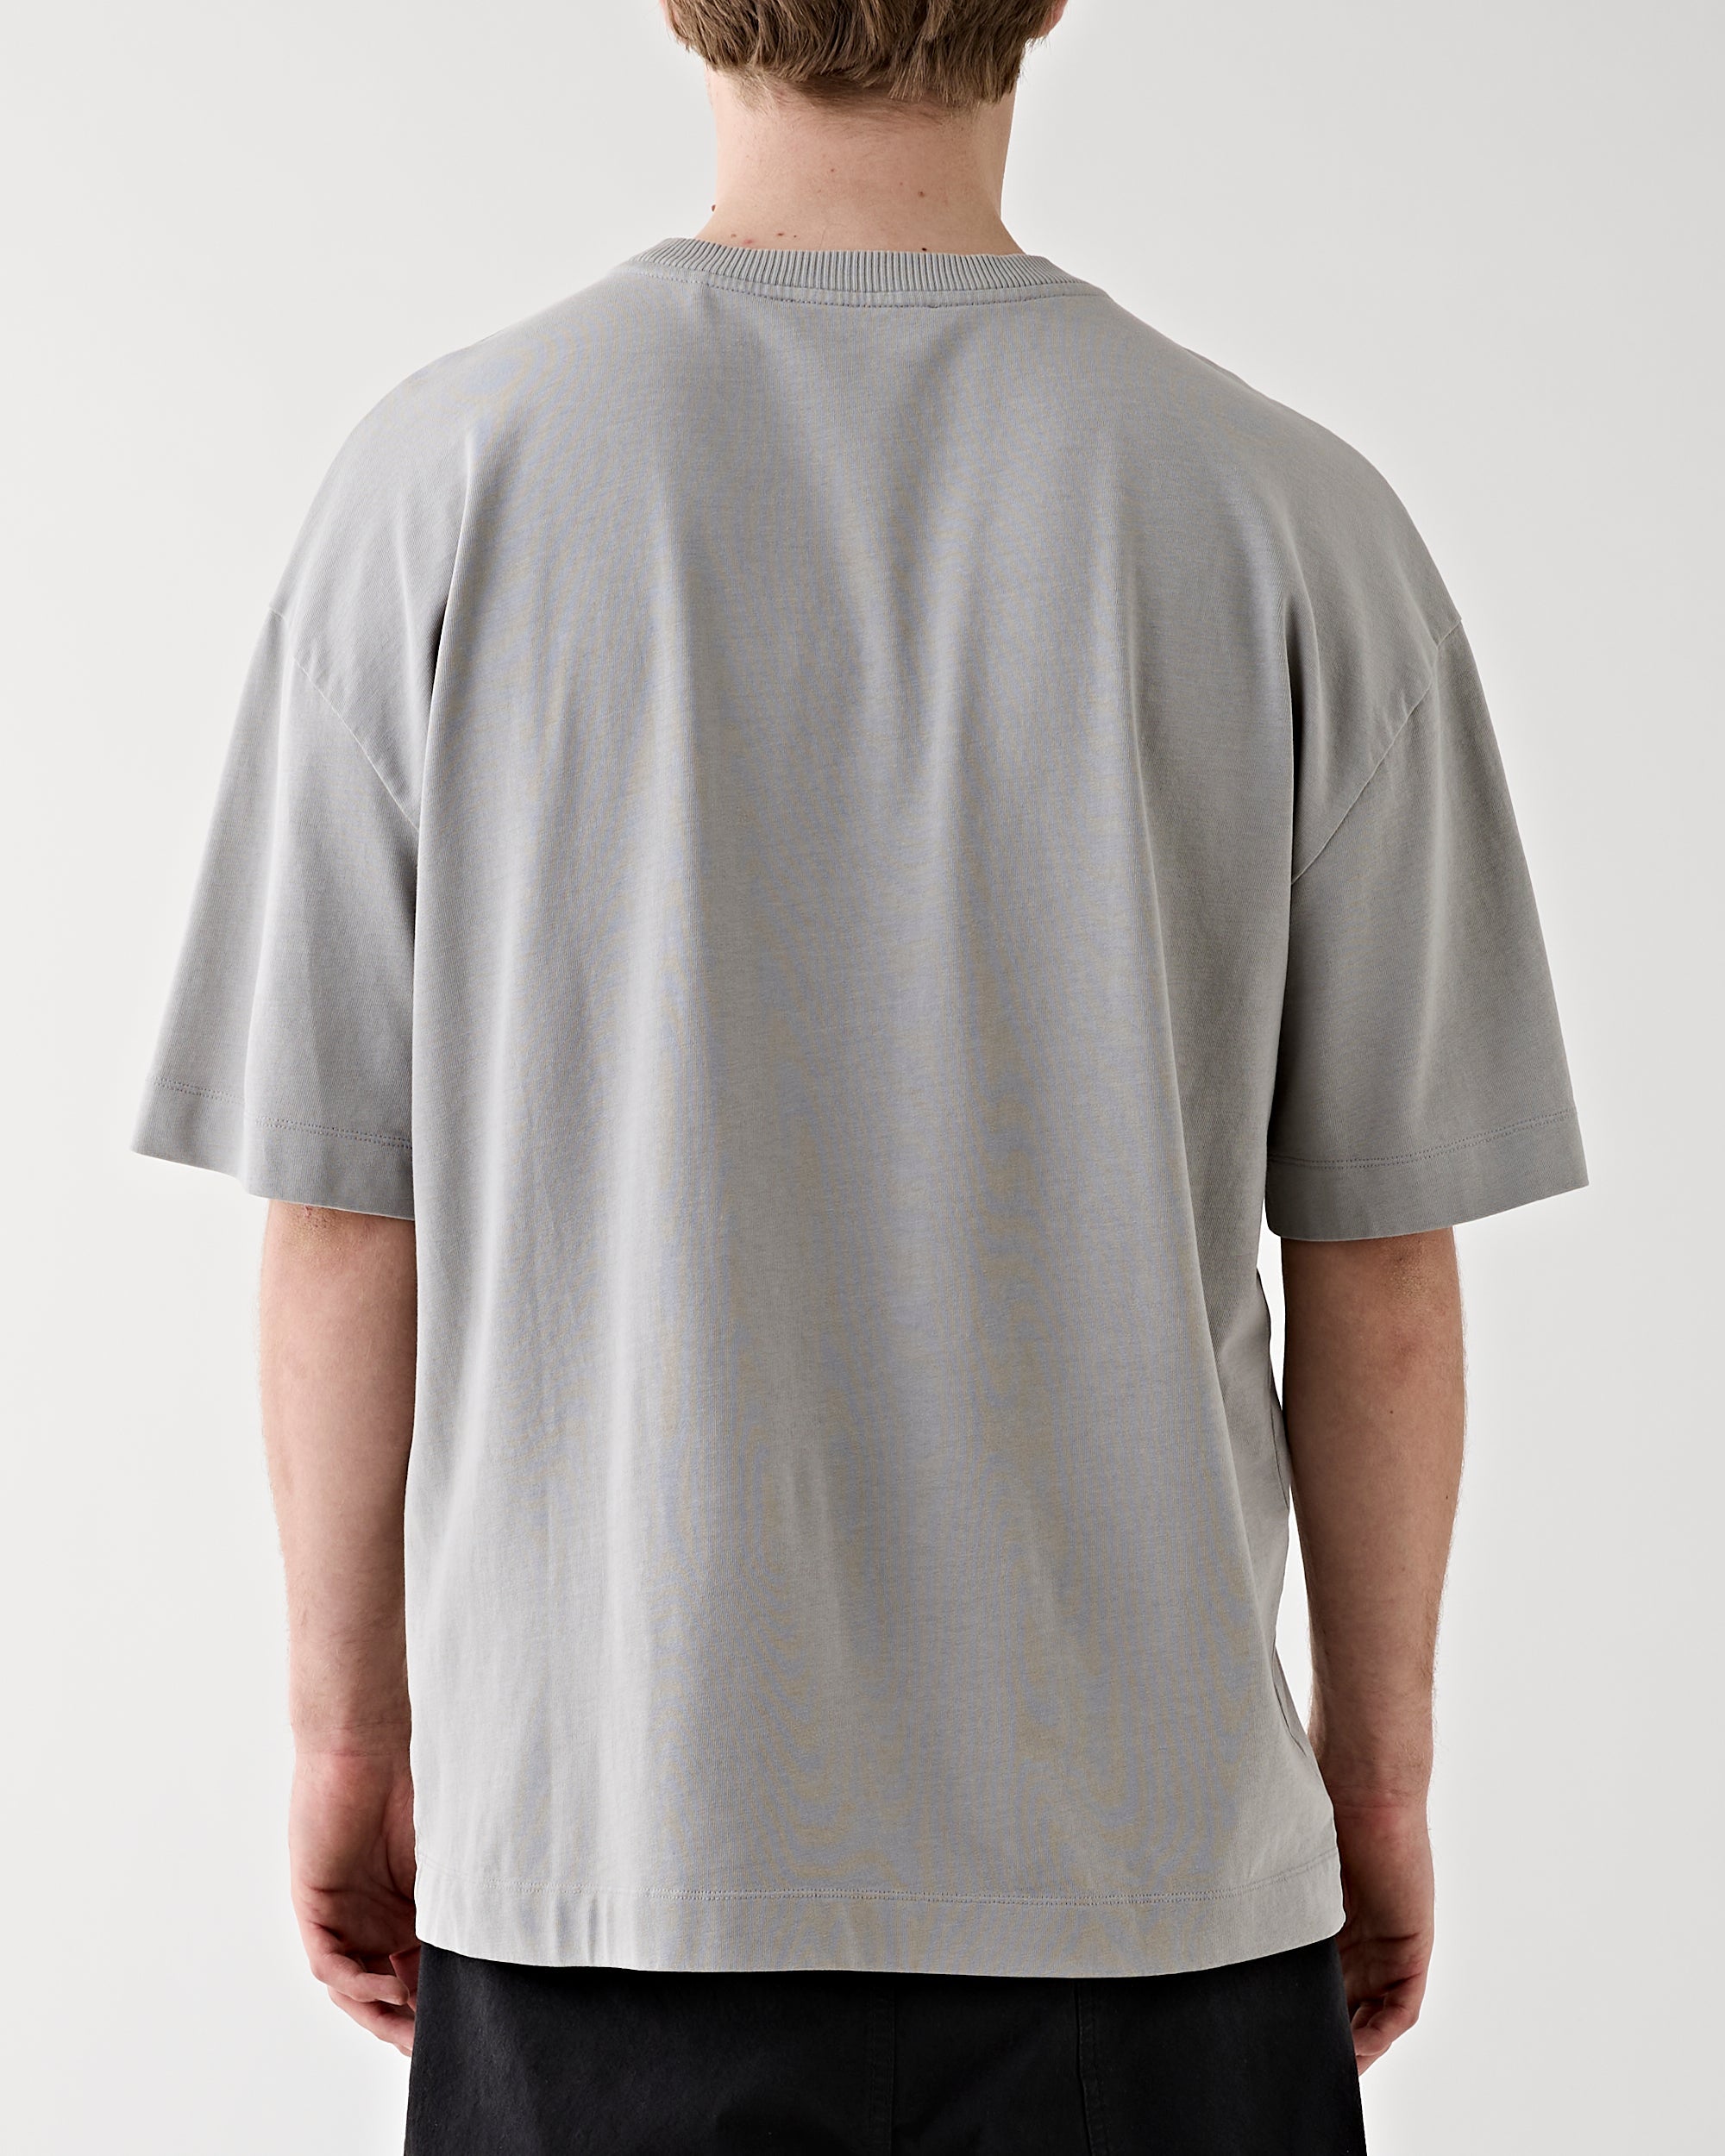 Applied Art Forms LM1-4 Oversized T- Shirt Ghost Grey T-shirt S/S Men